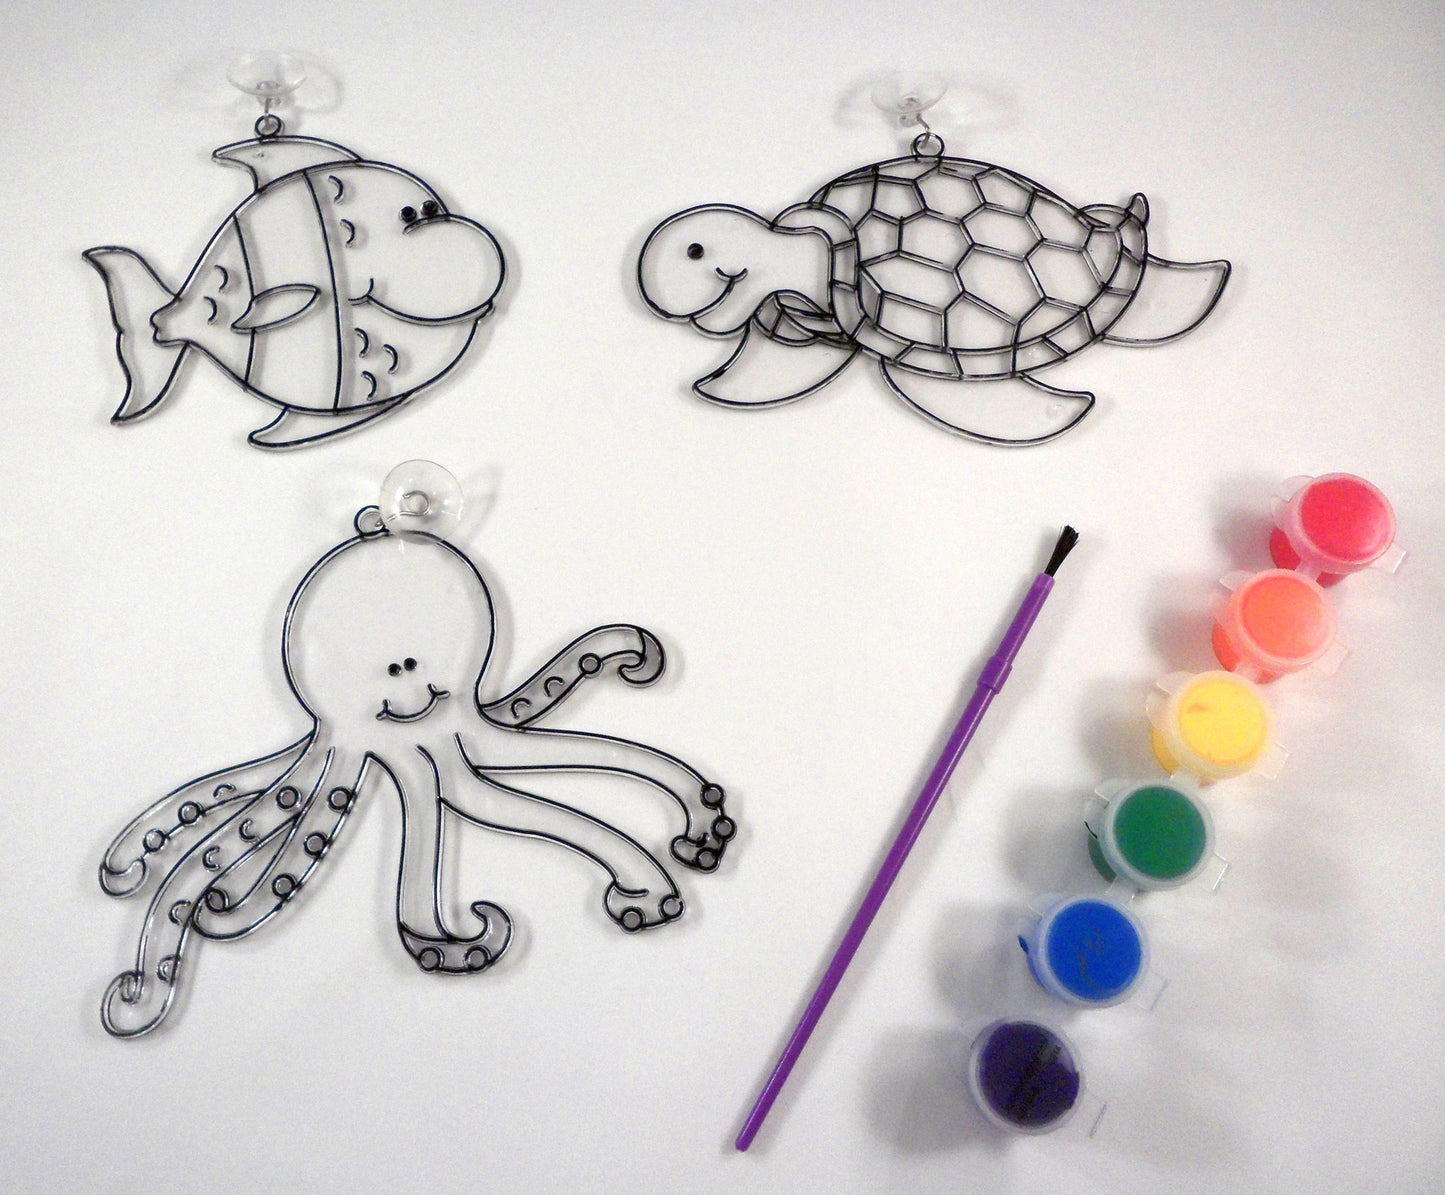 Sea-life sun-catchers - A House for Hermit Crab - Ivy Kids subscription box activities.